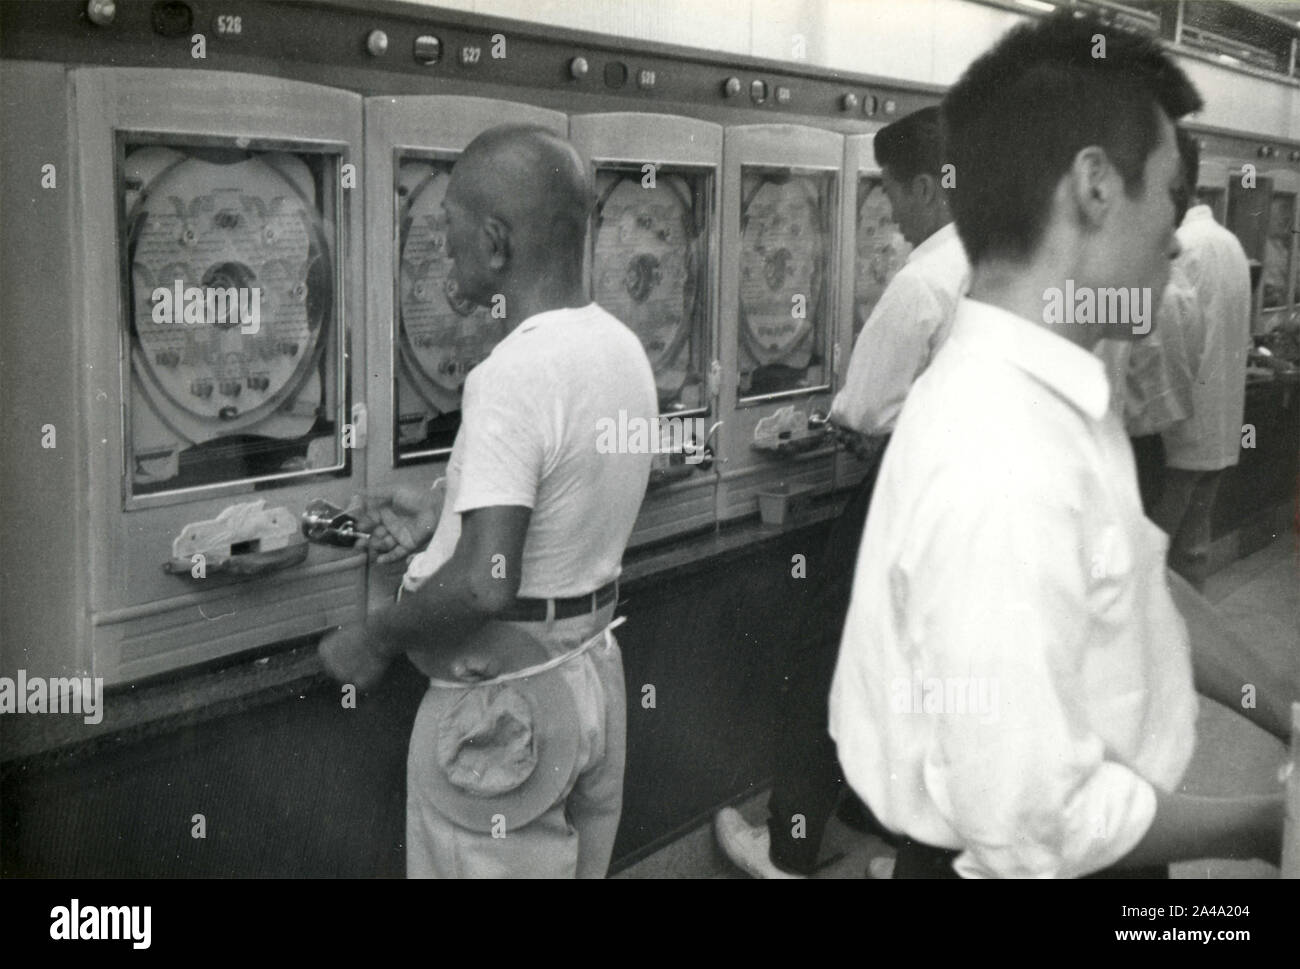 Gambles playing with old slot machines, Japan 1958 Stock Photo